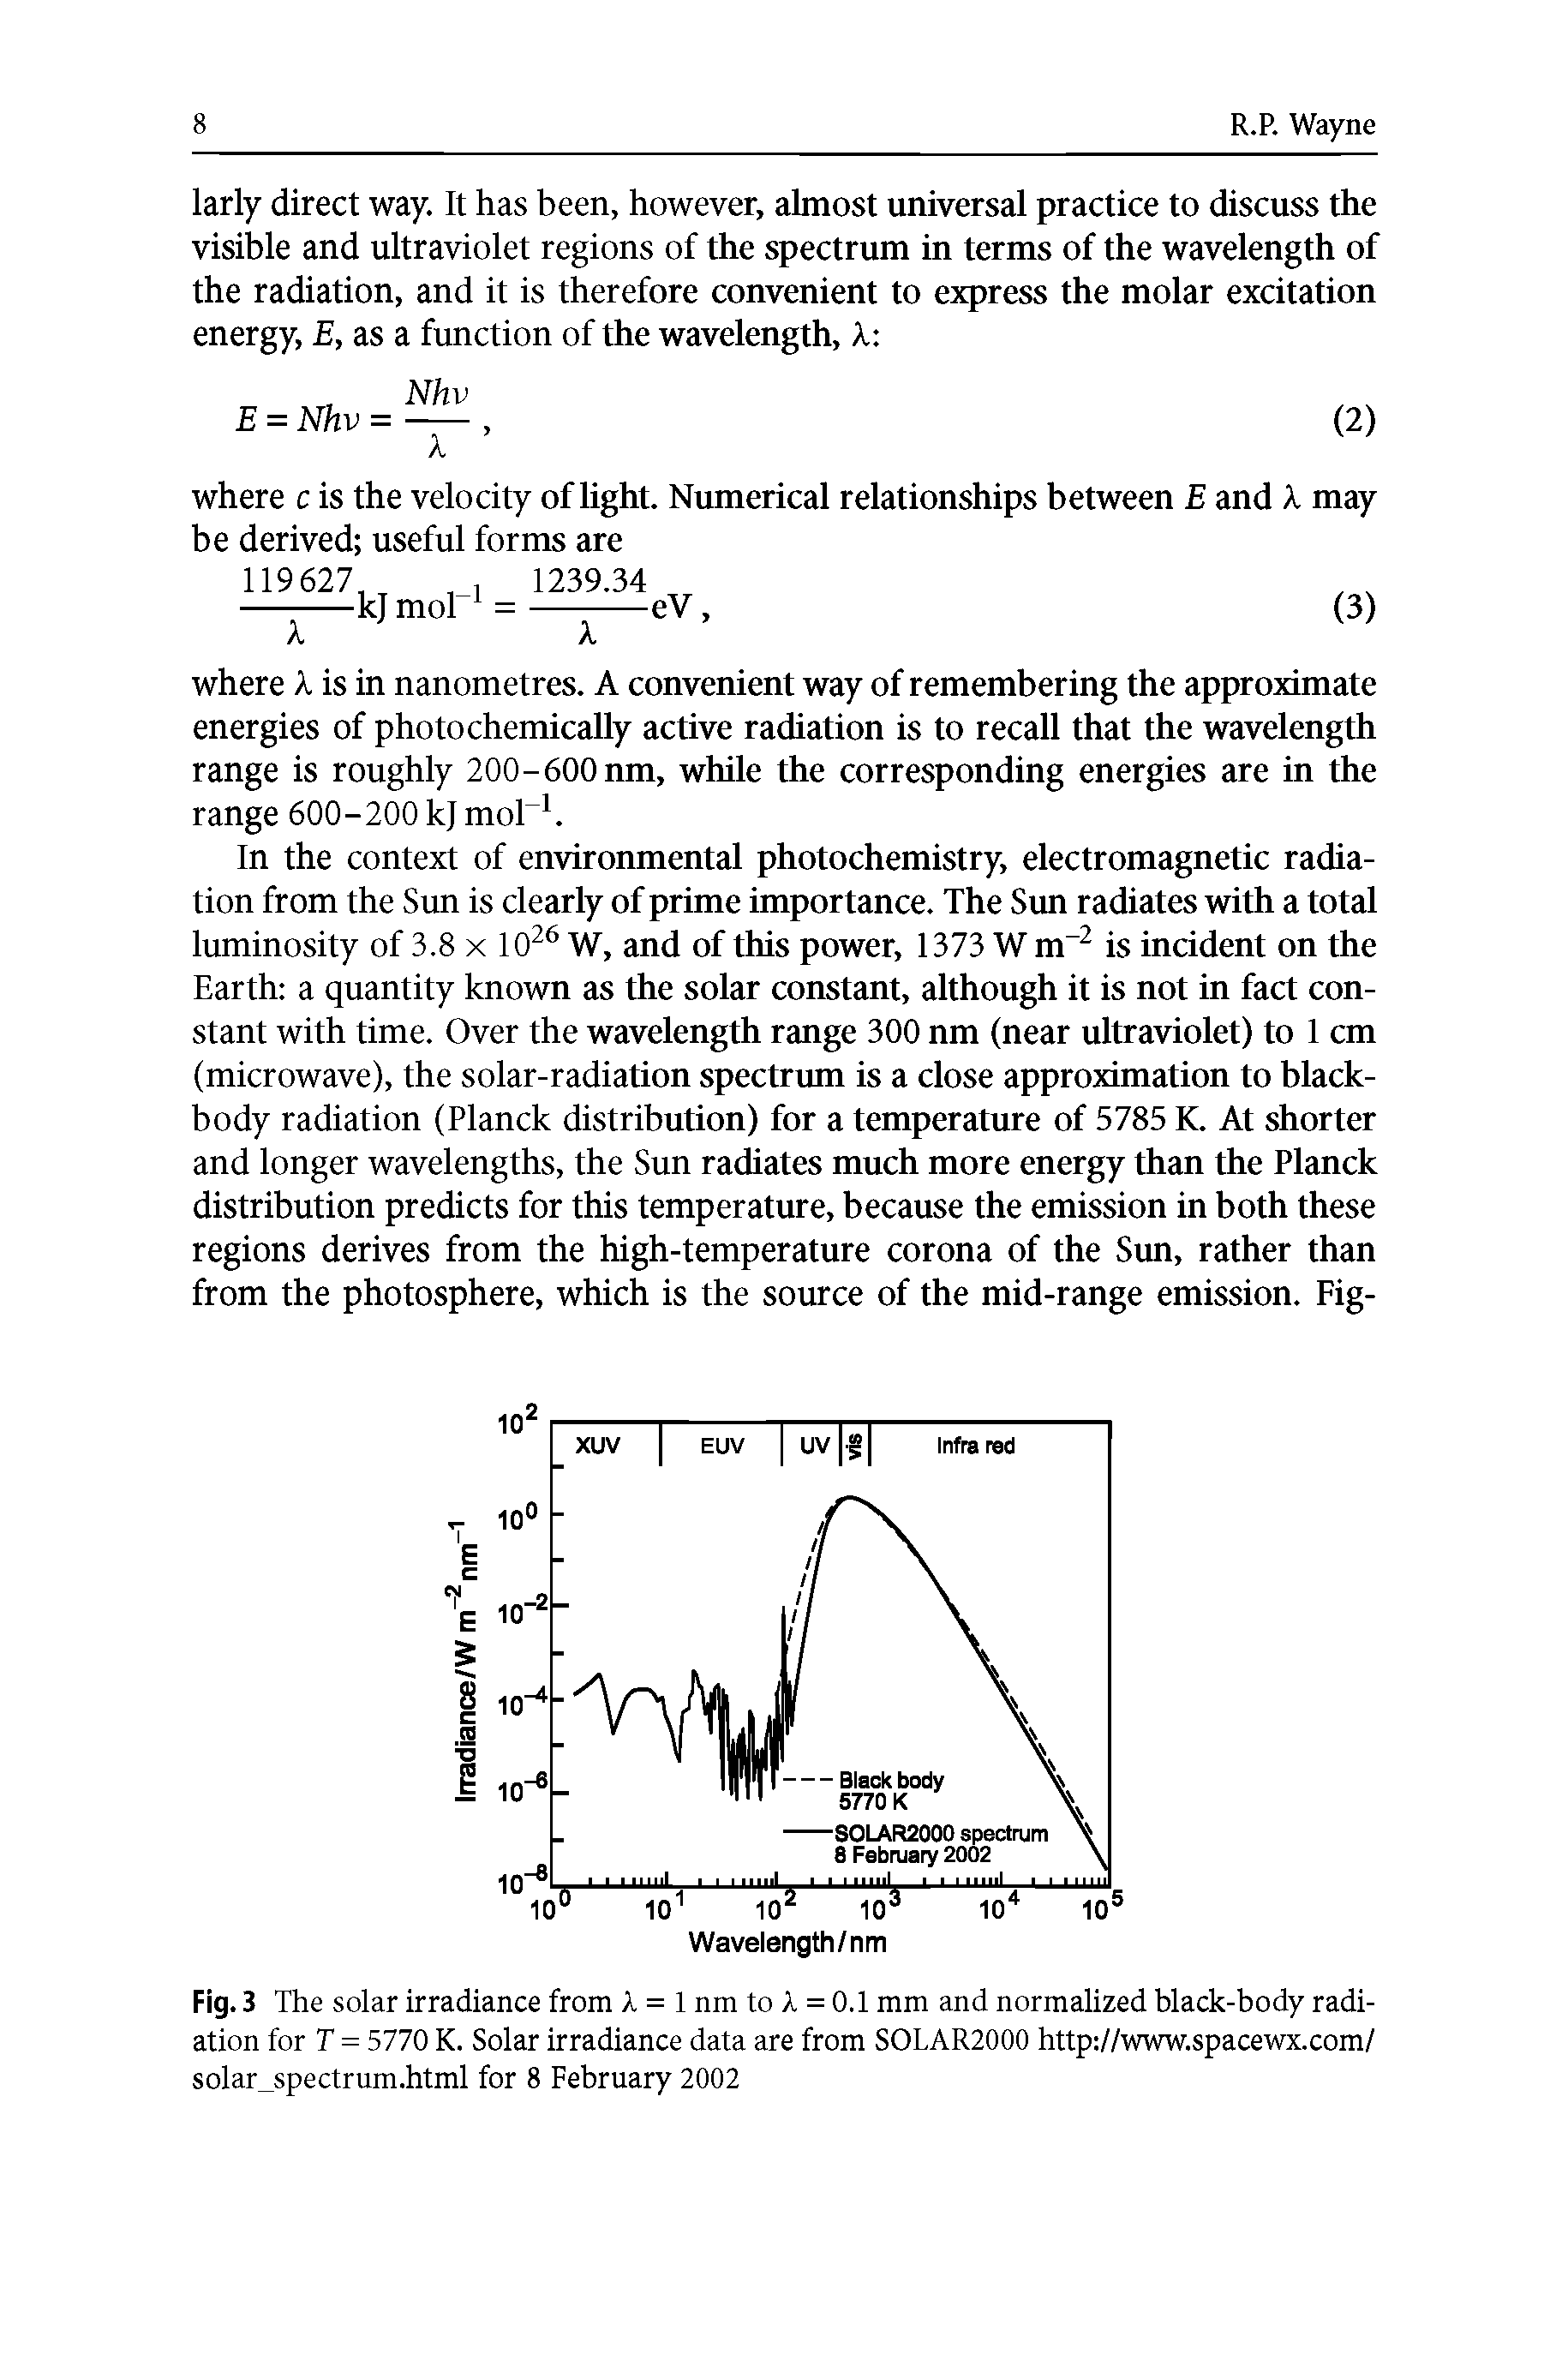 Fig. 3 The solar irradiance from X = 1 nm to X = 0.1 mm and normalized black-body radiation for T = 5770 K. Solar irradiance data are from SOLAR2000 http //www.spacewx.com/ solar spectrum.html for 8 February 2002...